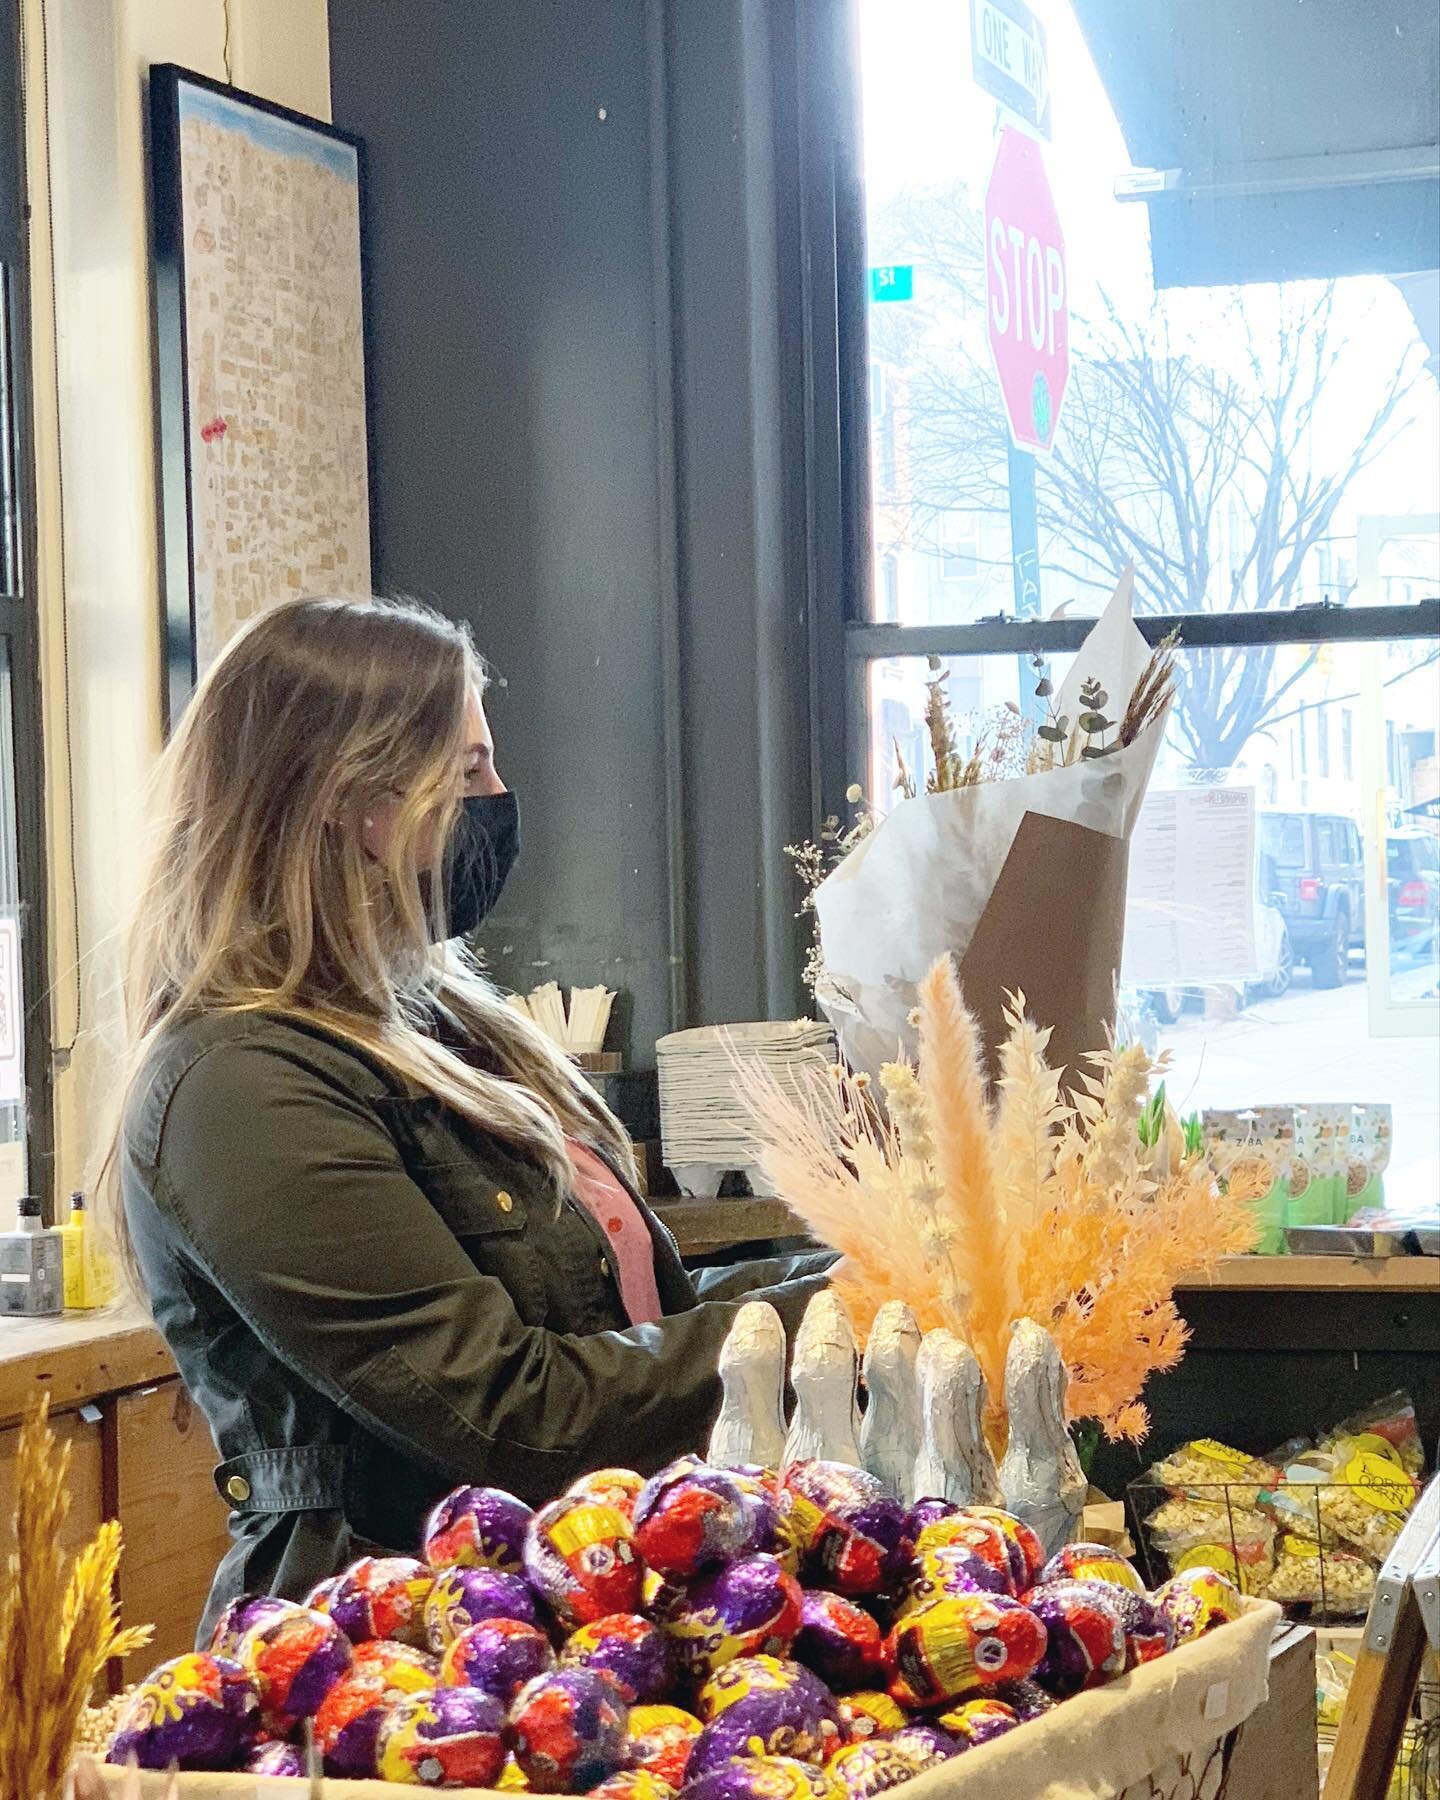 Sheer joy! - Moments after @seefielden drops off her weekly whimsical arrangements, we&rsquo;re all surprised and delighted by the beauty withheld in each little dried bloom. 
Thanks @bizcozine for letting us capture this moment with you!